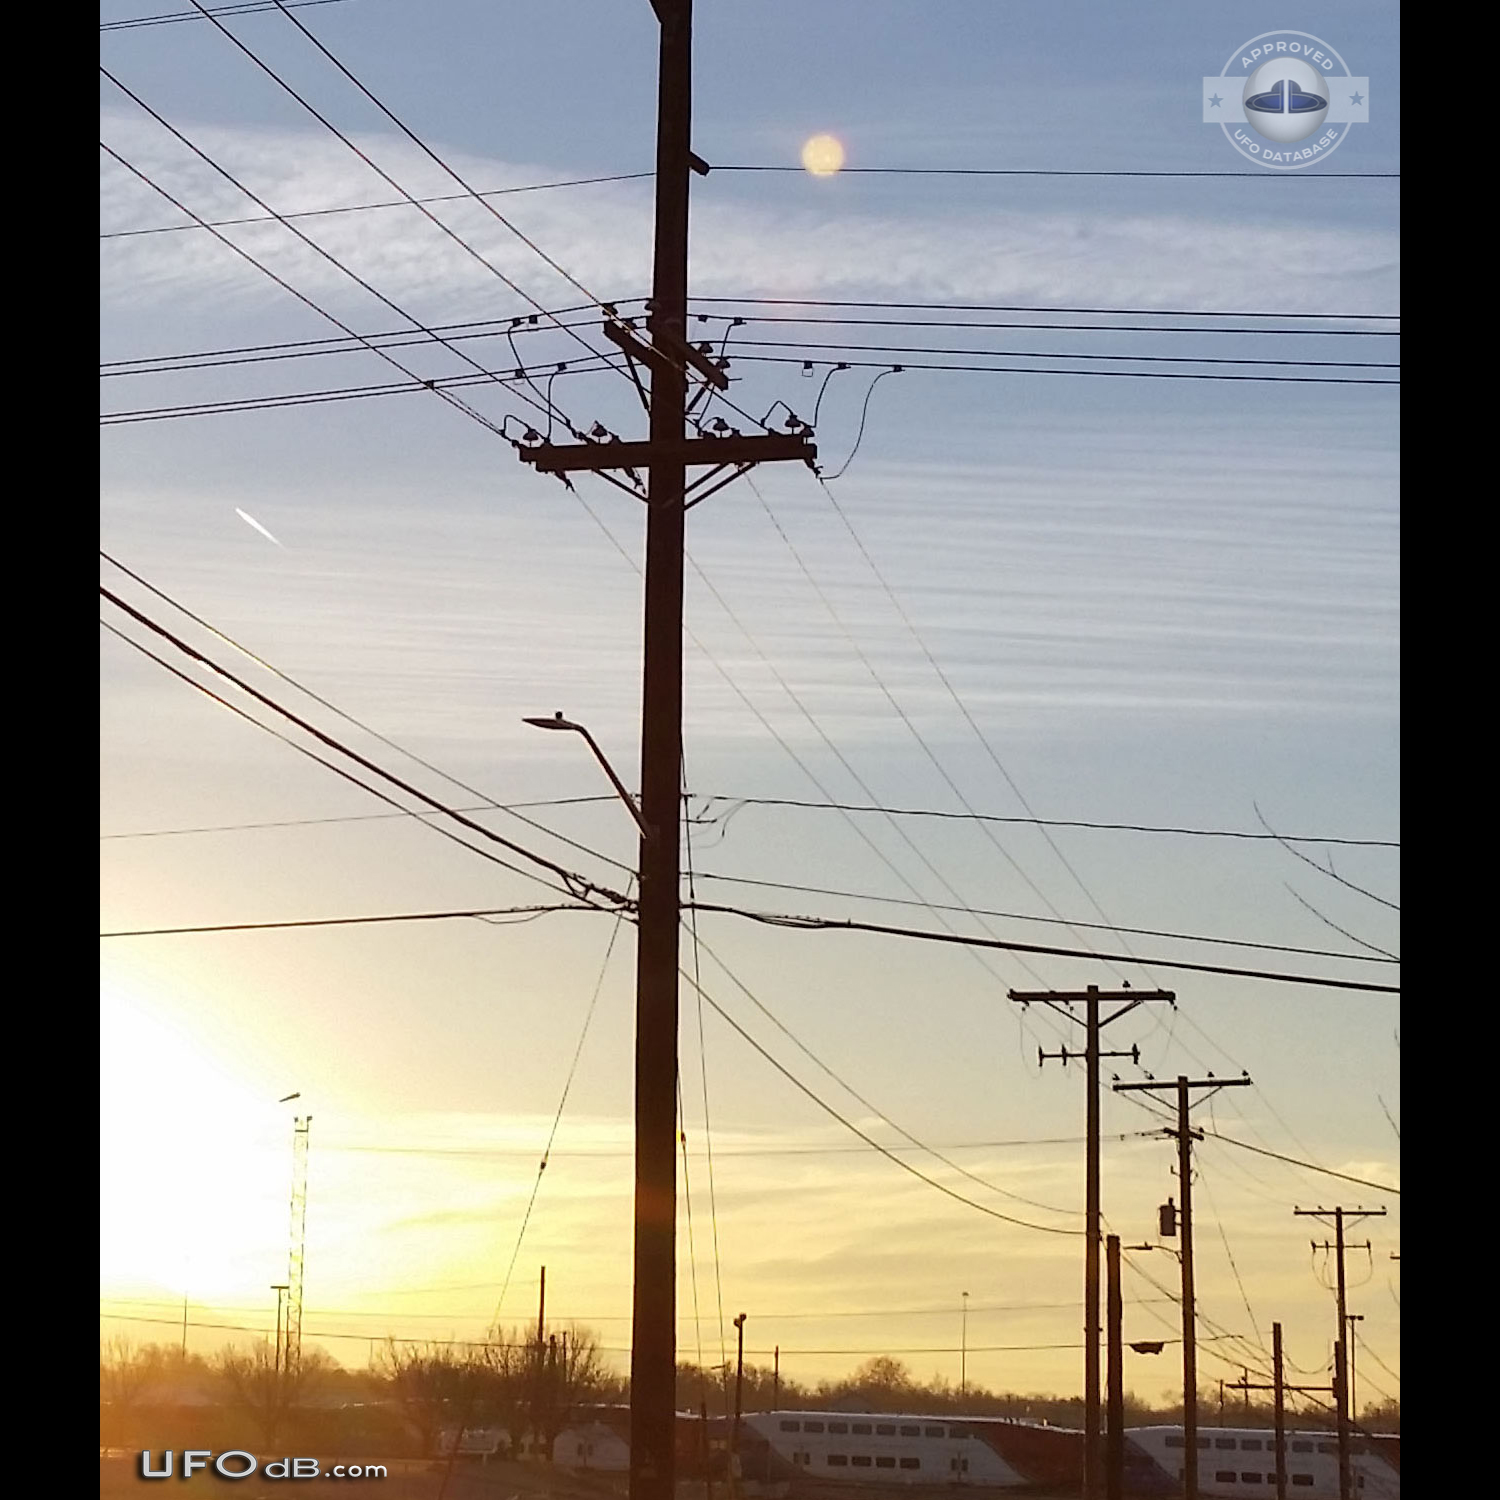 After feeling ET presence Orb UFO seen on Picture Salt Lake City 2015 UFO Picture #638-5